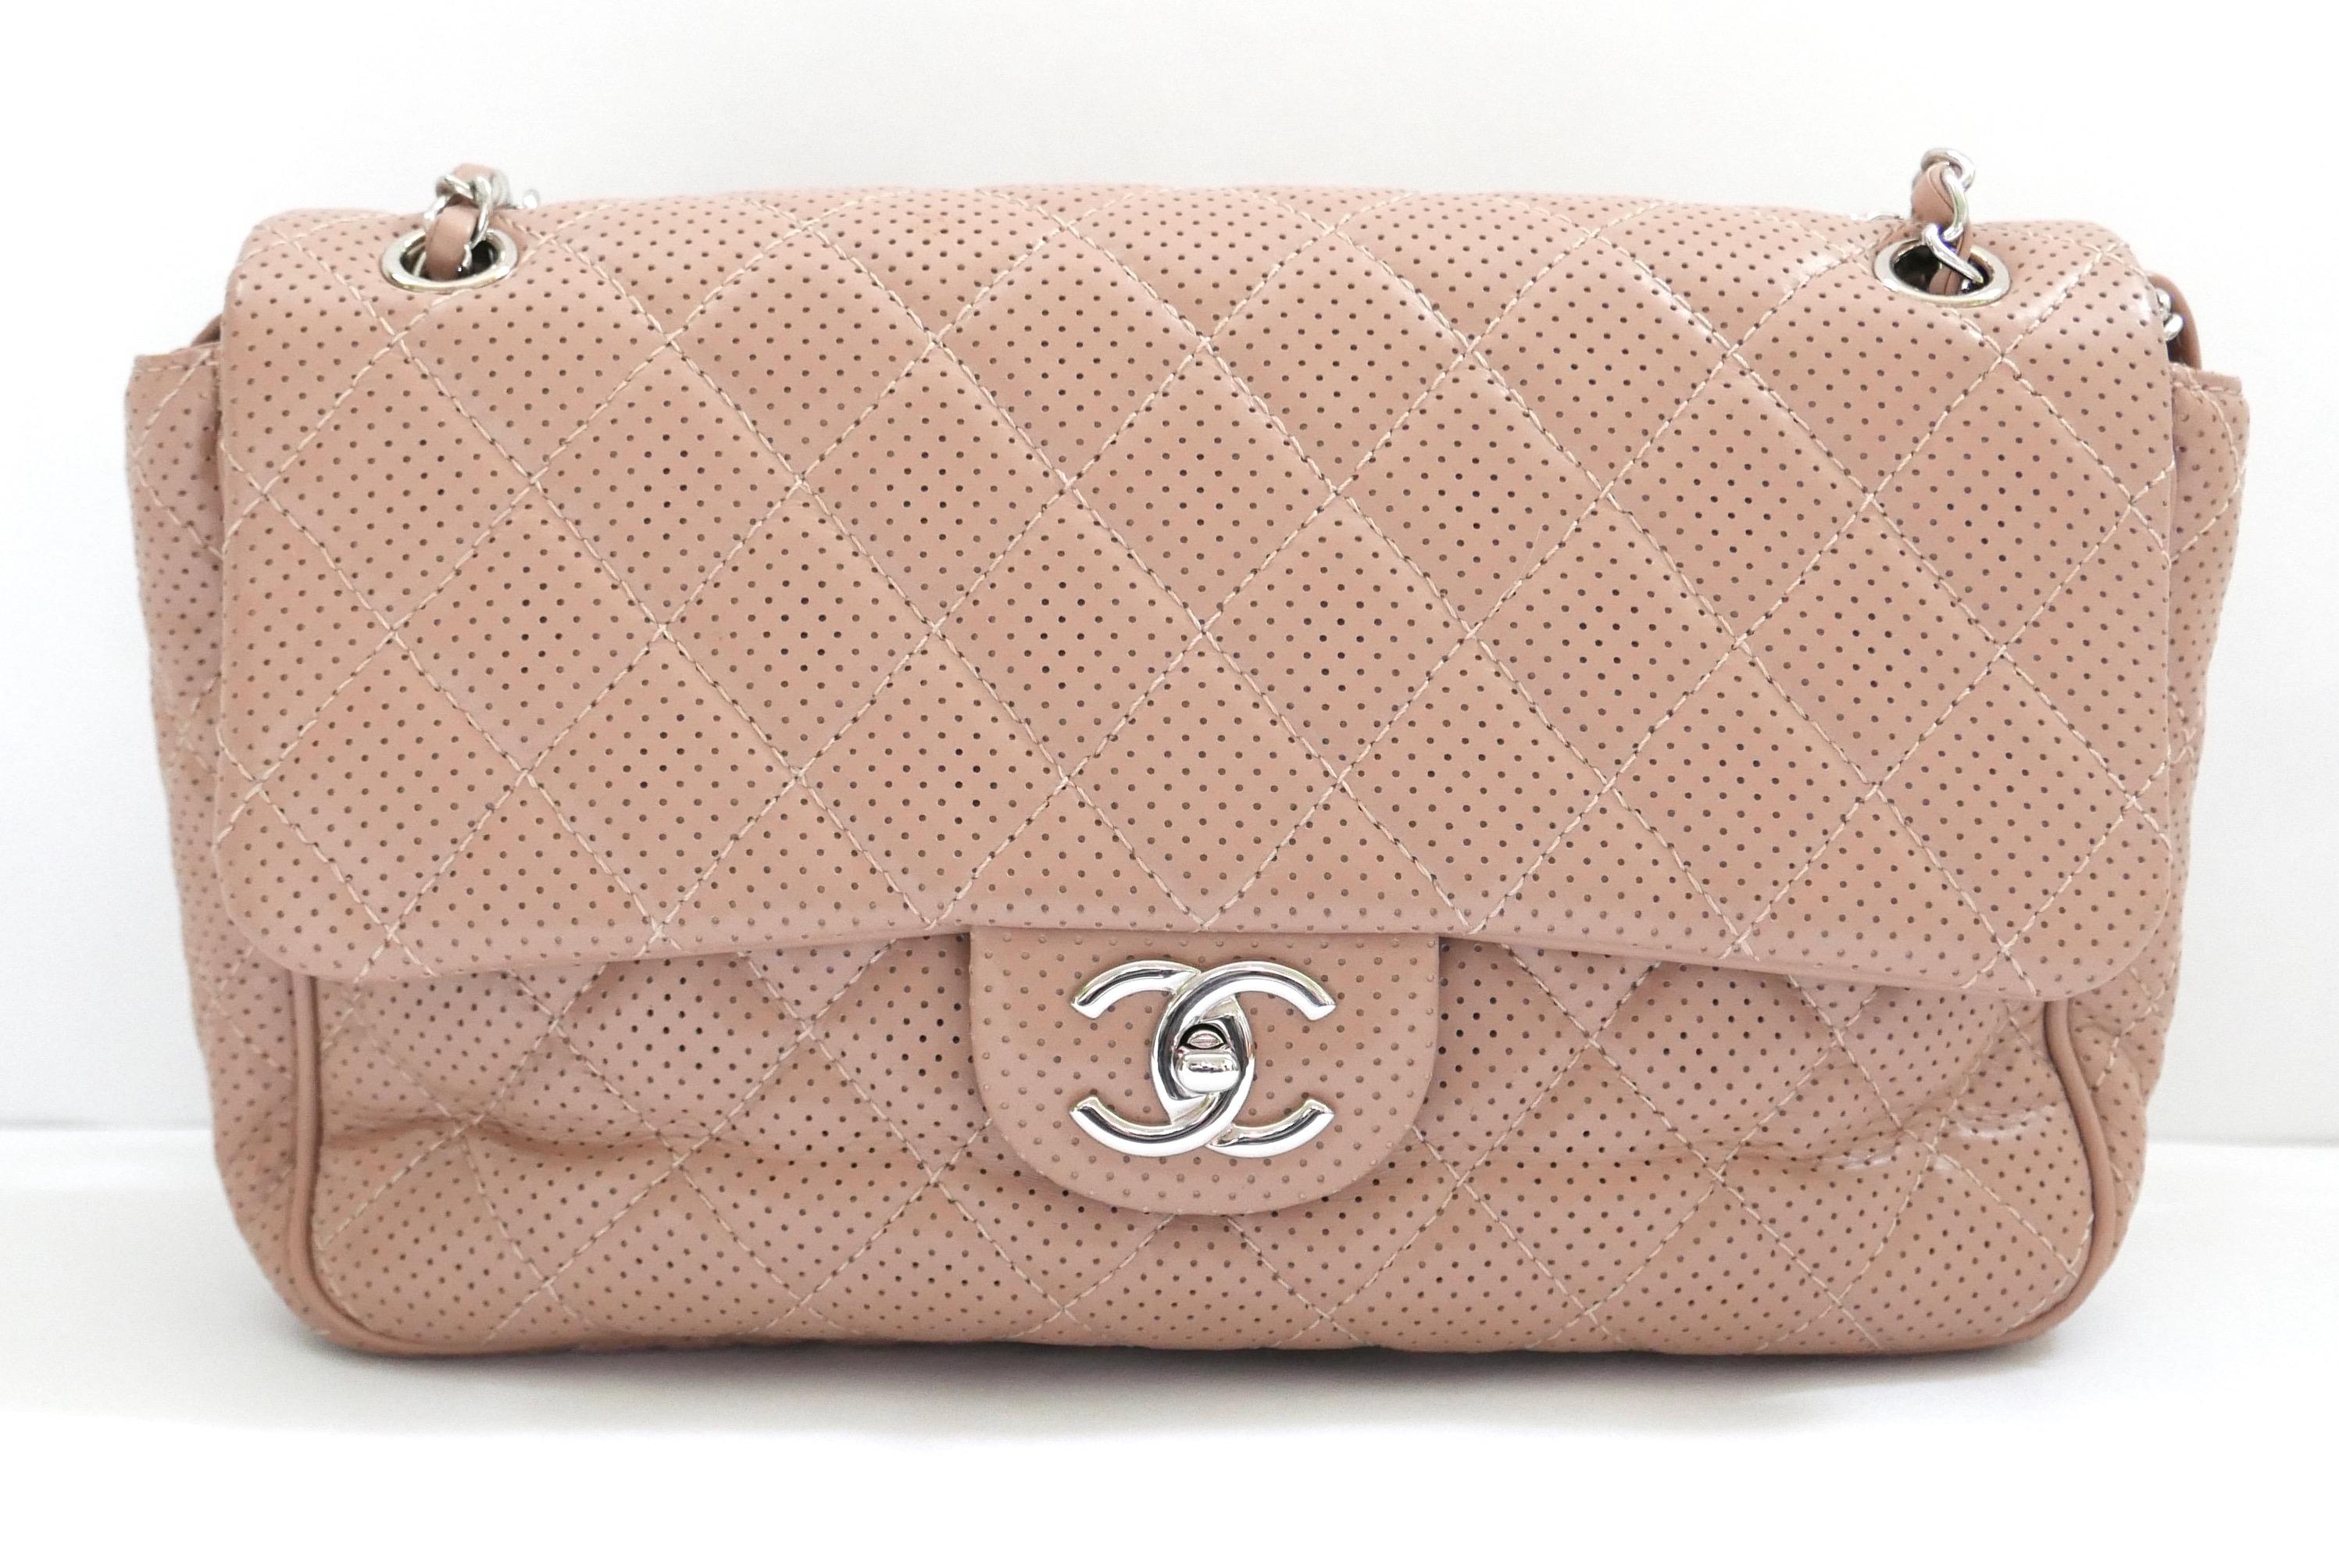 Gorgeous Chanel Classique Flap Bag - unused with original Chanel tissue inside, authenticity card and Chanel dustbag. Made from smooth beige perforated leather with iconic quilted pattern, chain handle with shoulder pad and twist clasp. Lined in